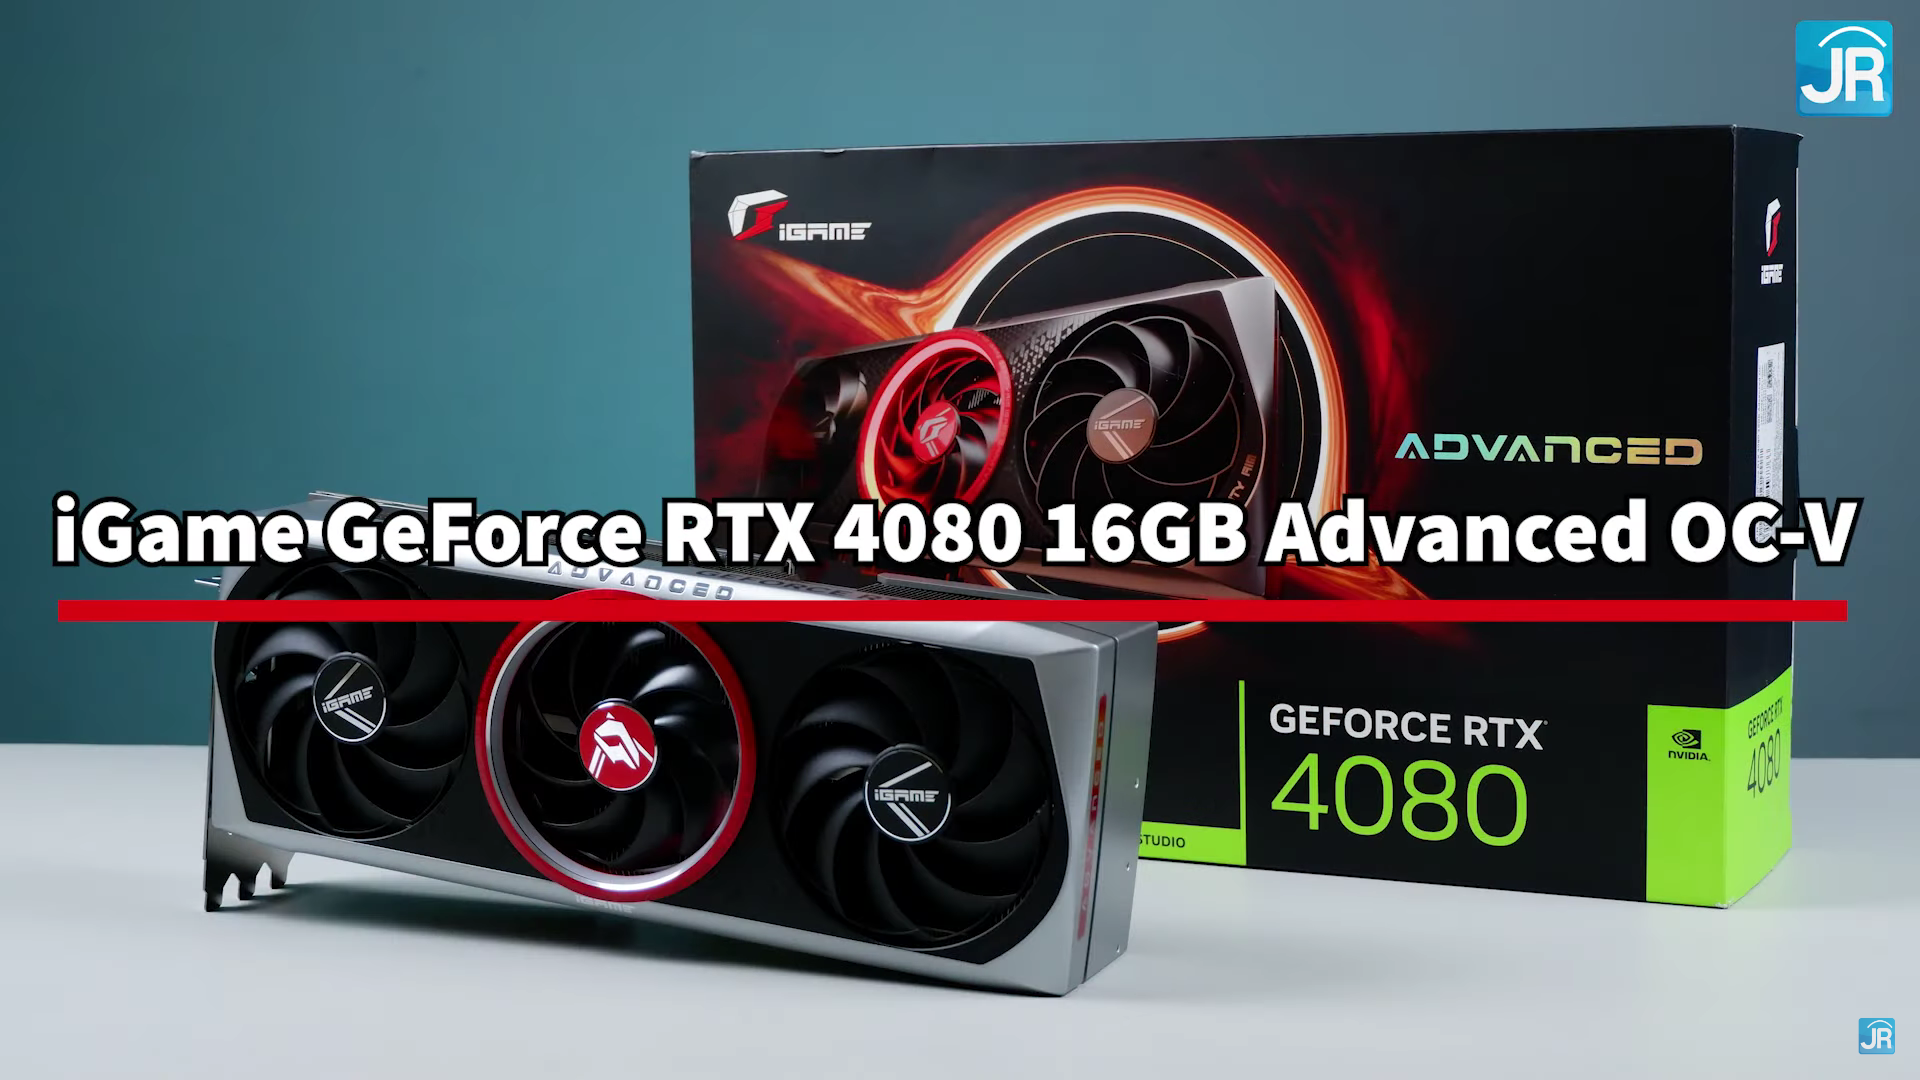 Colorful iGame GeForce RTX 4080 Advanced 16GB